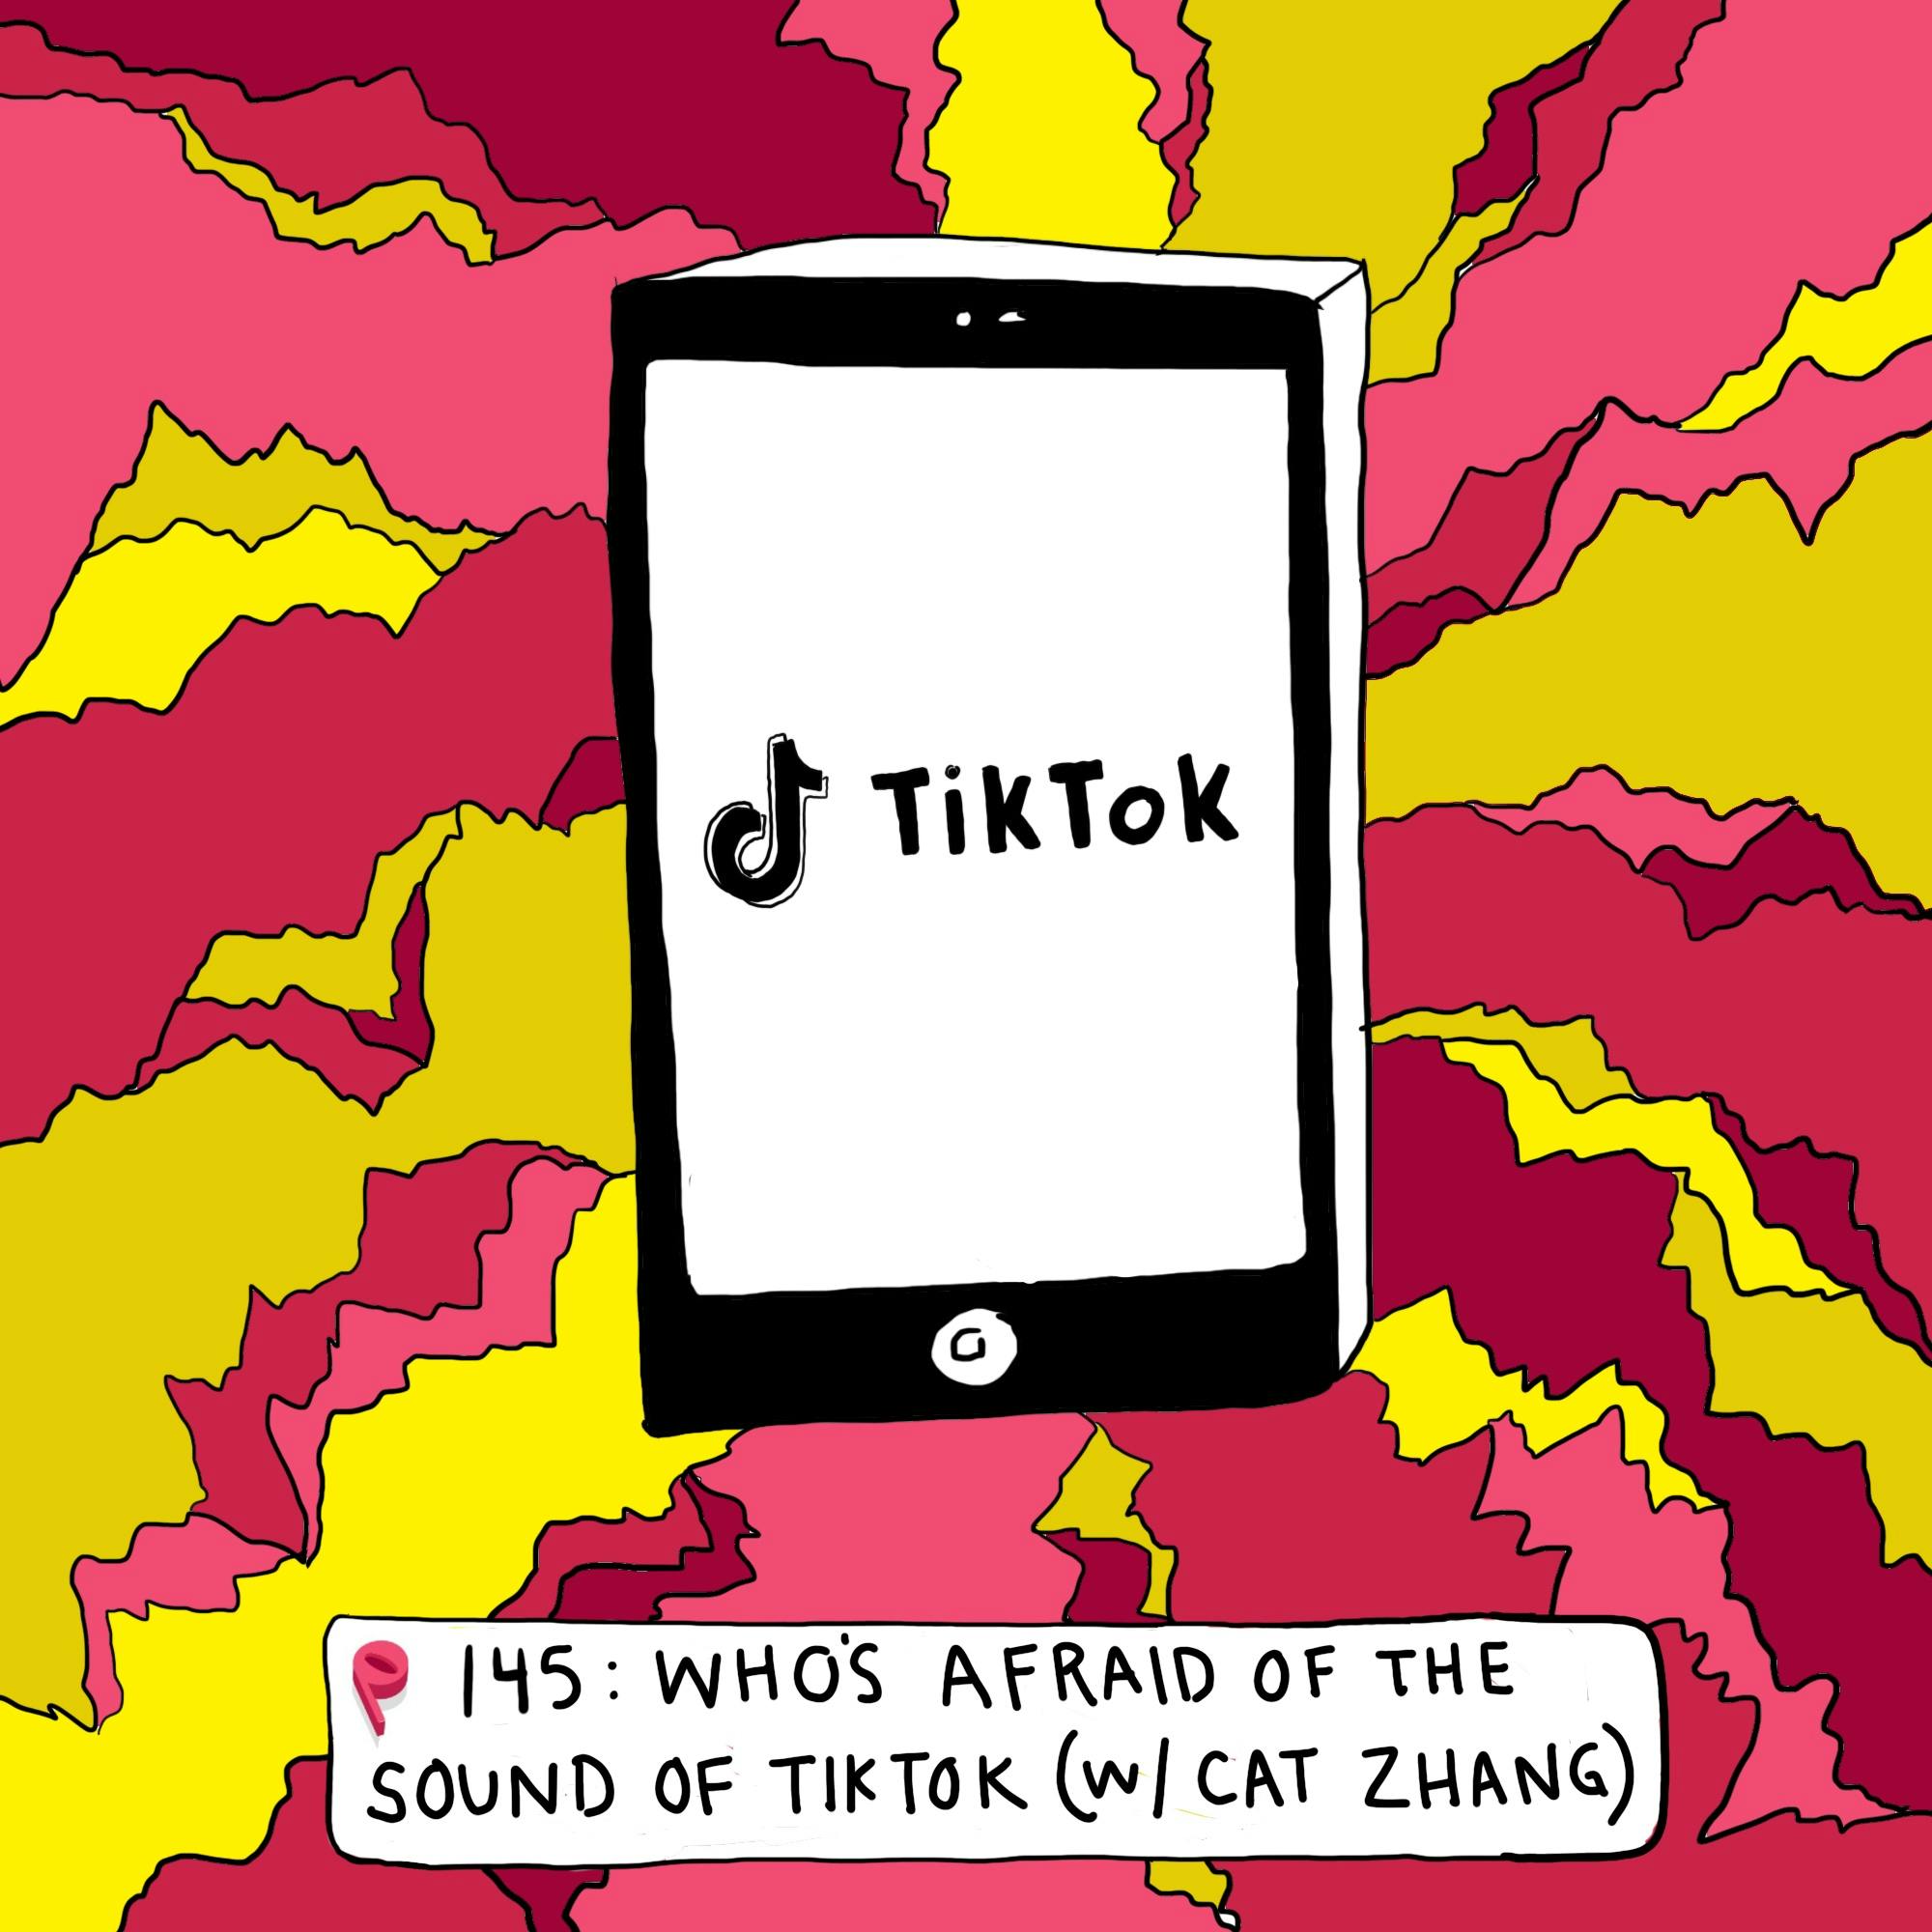 Who’s Afraid of the Sound of TikTok? (w Cat Zhang)